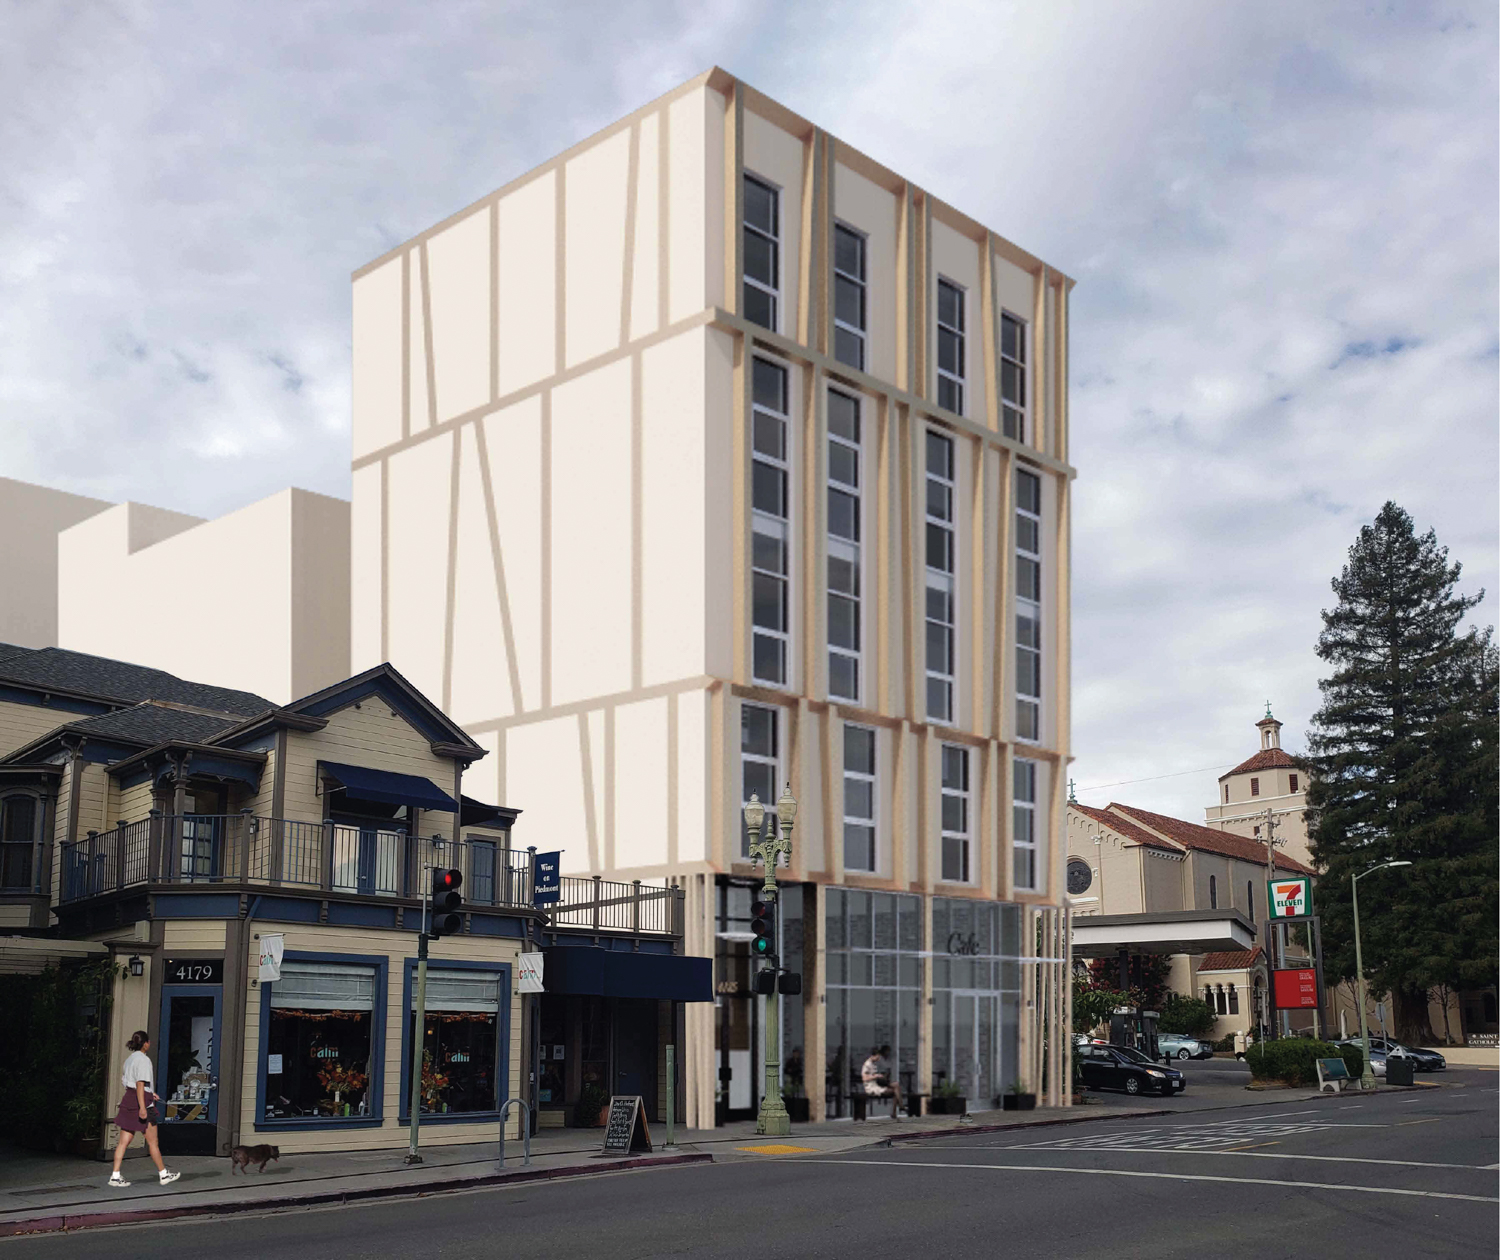 4185 Piedmont Avenue new design, rendering by Kava Massih Architects